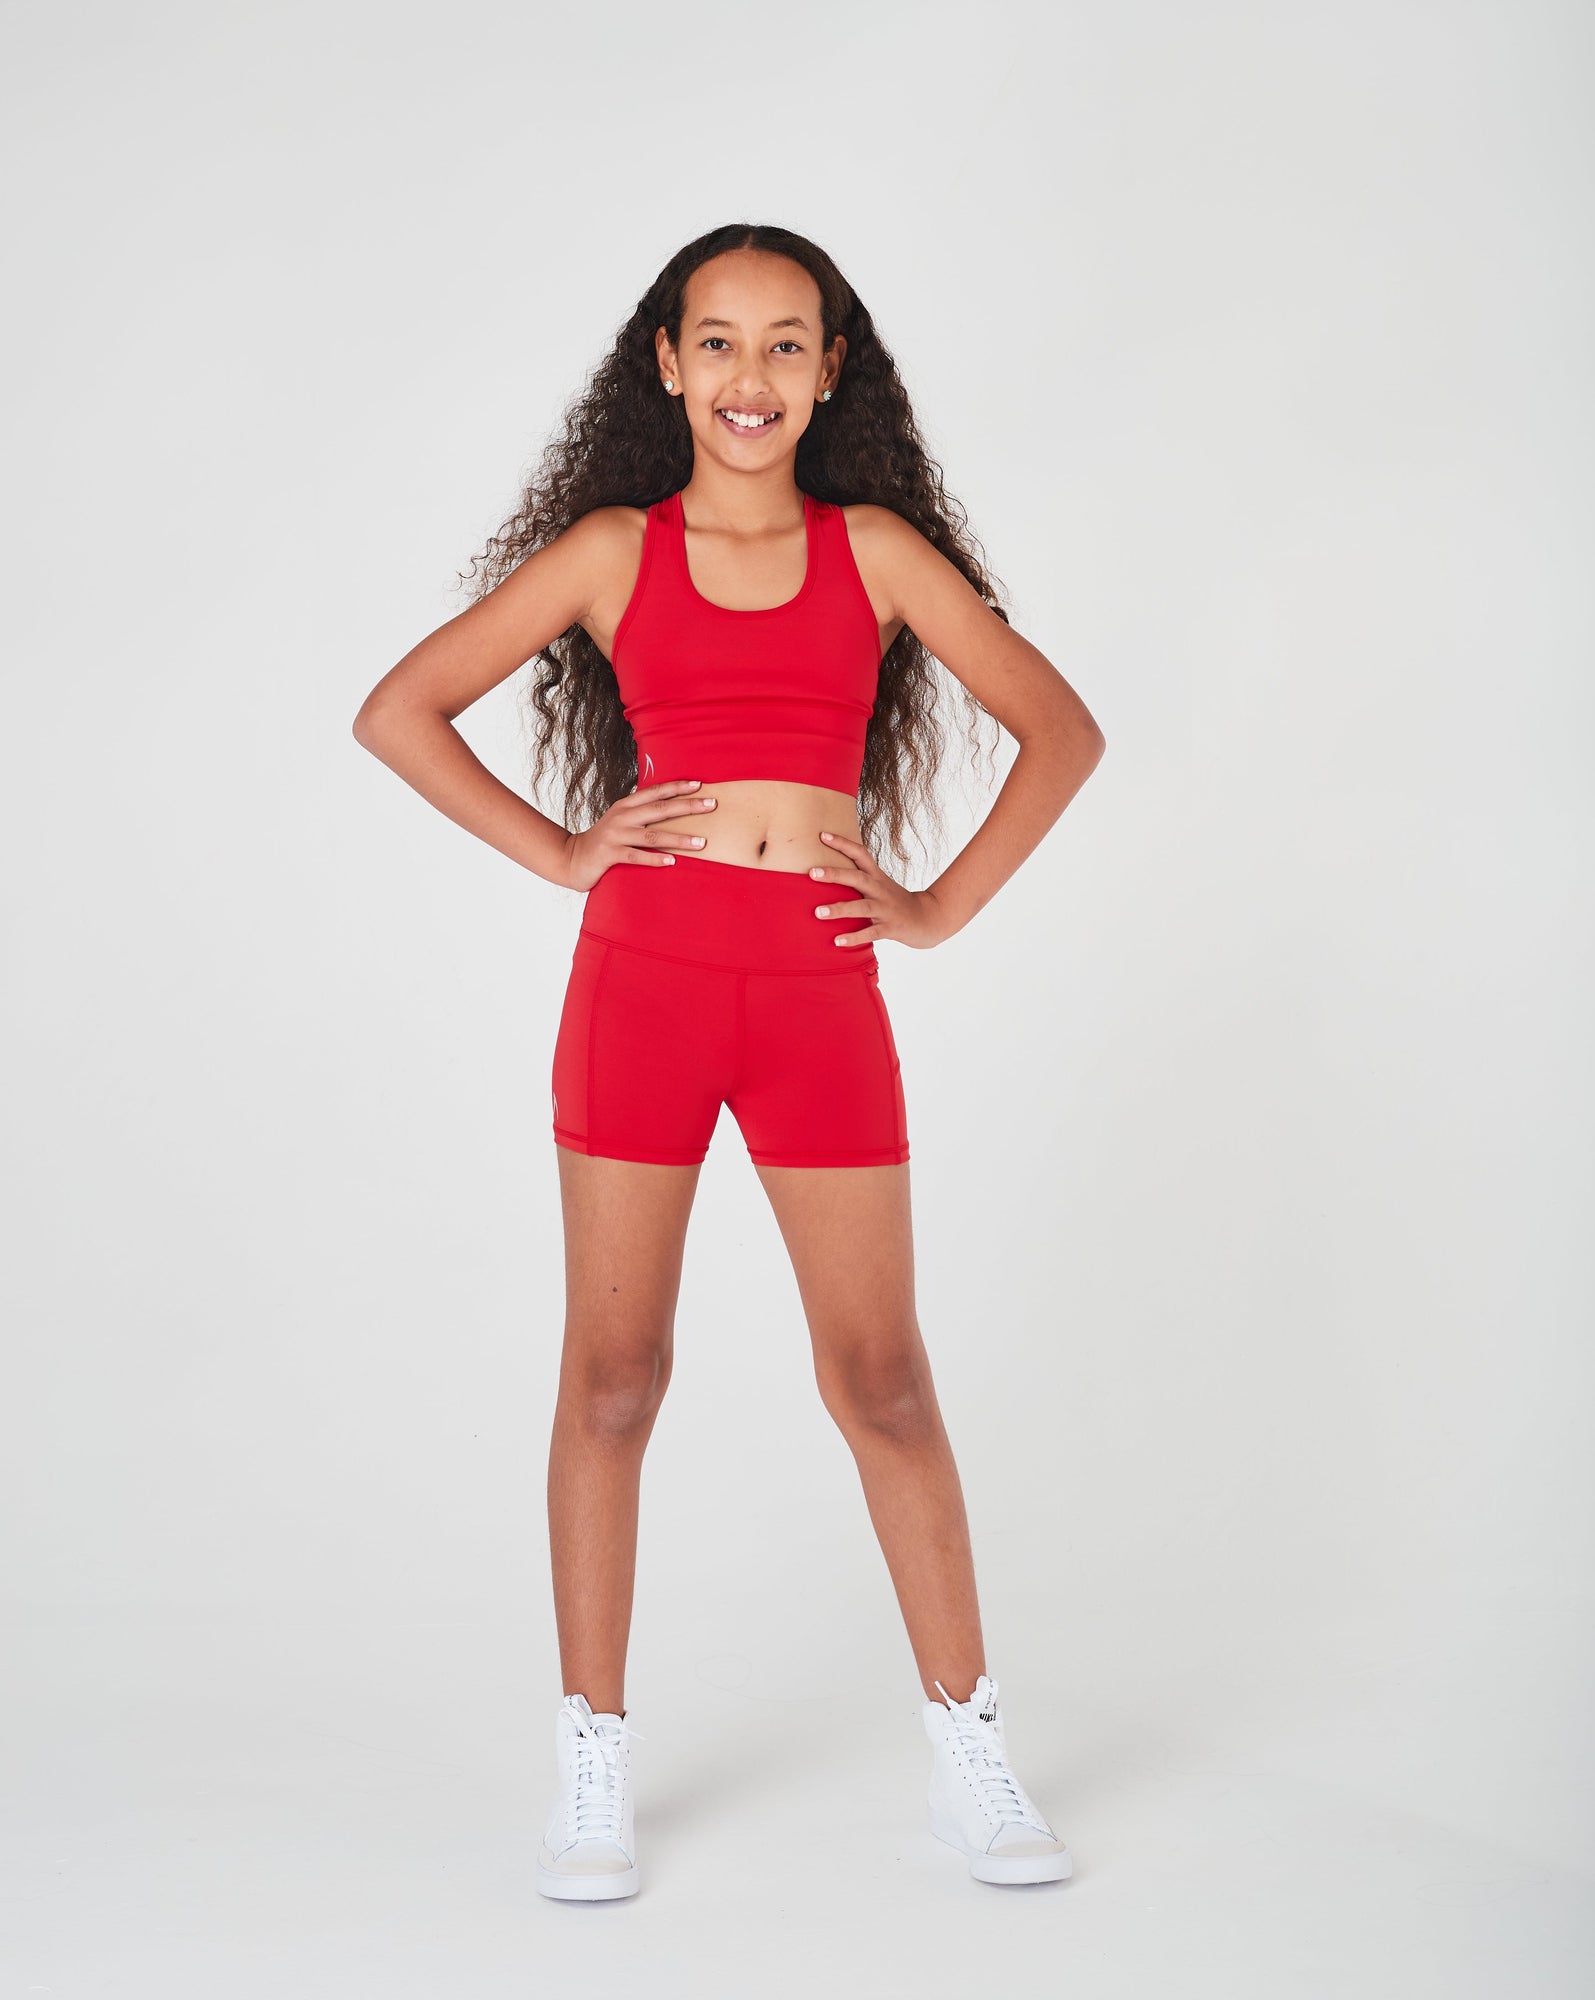 Girls Red Sports Shorts